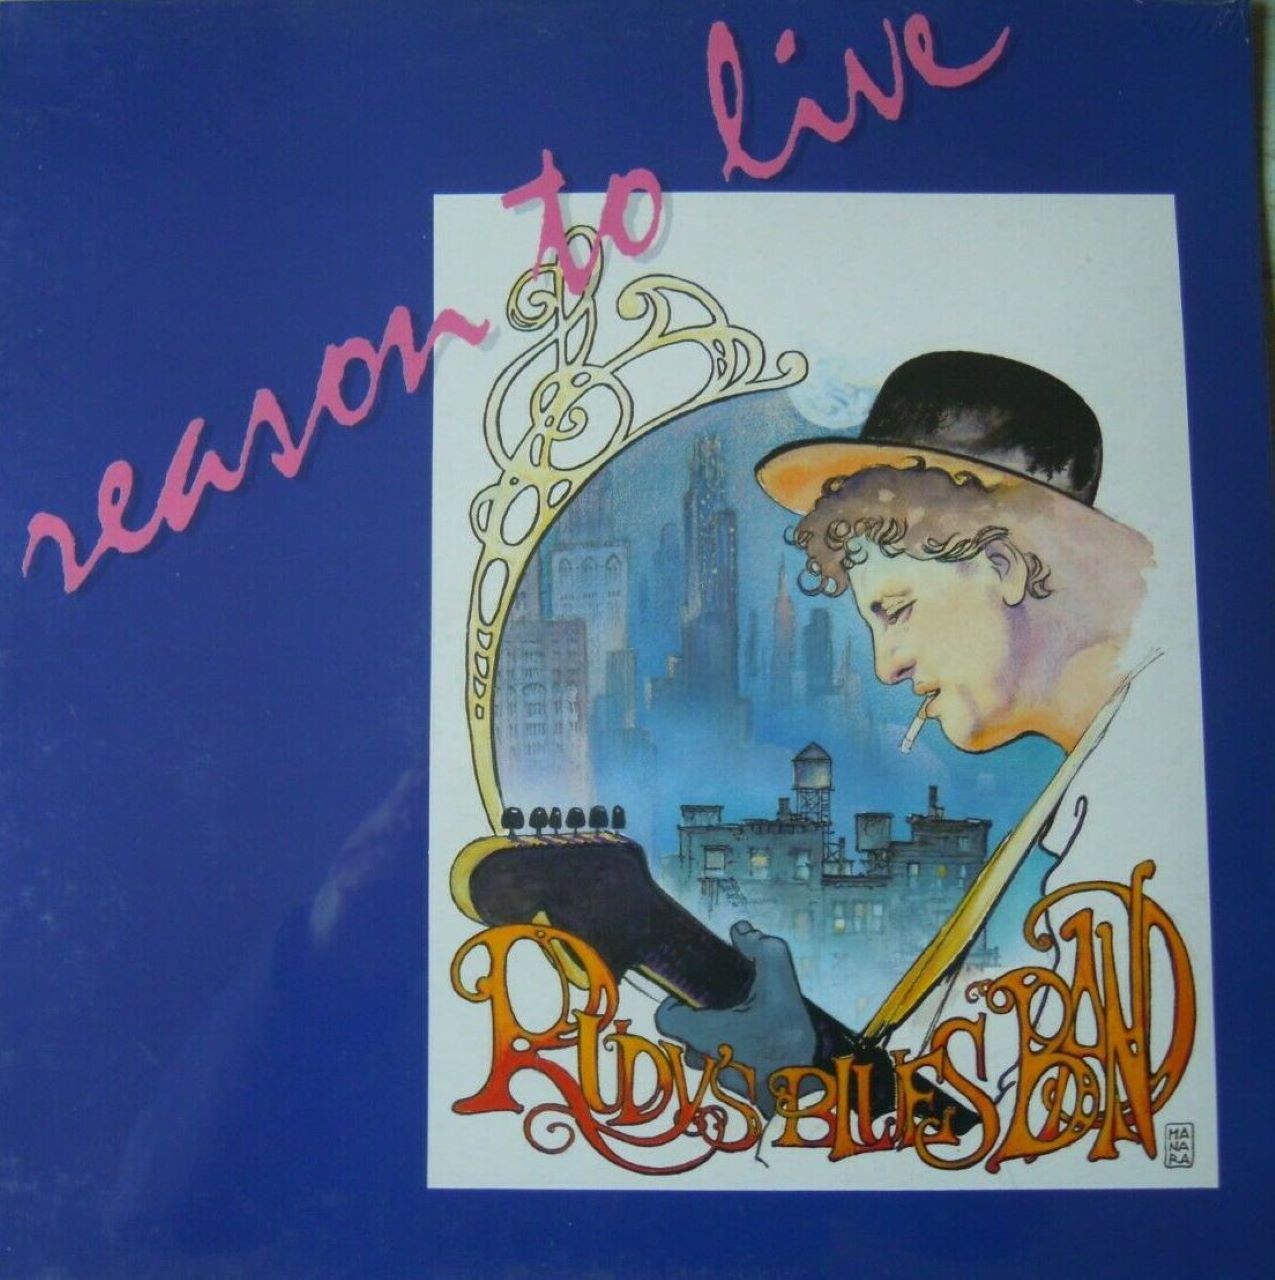 Rudy's Blues Band – Reason To Live cover album